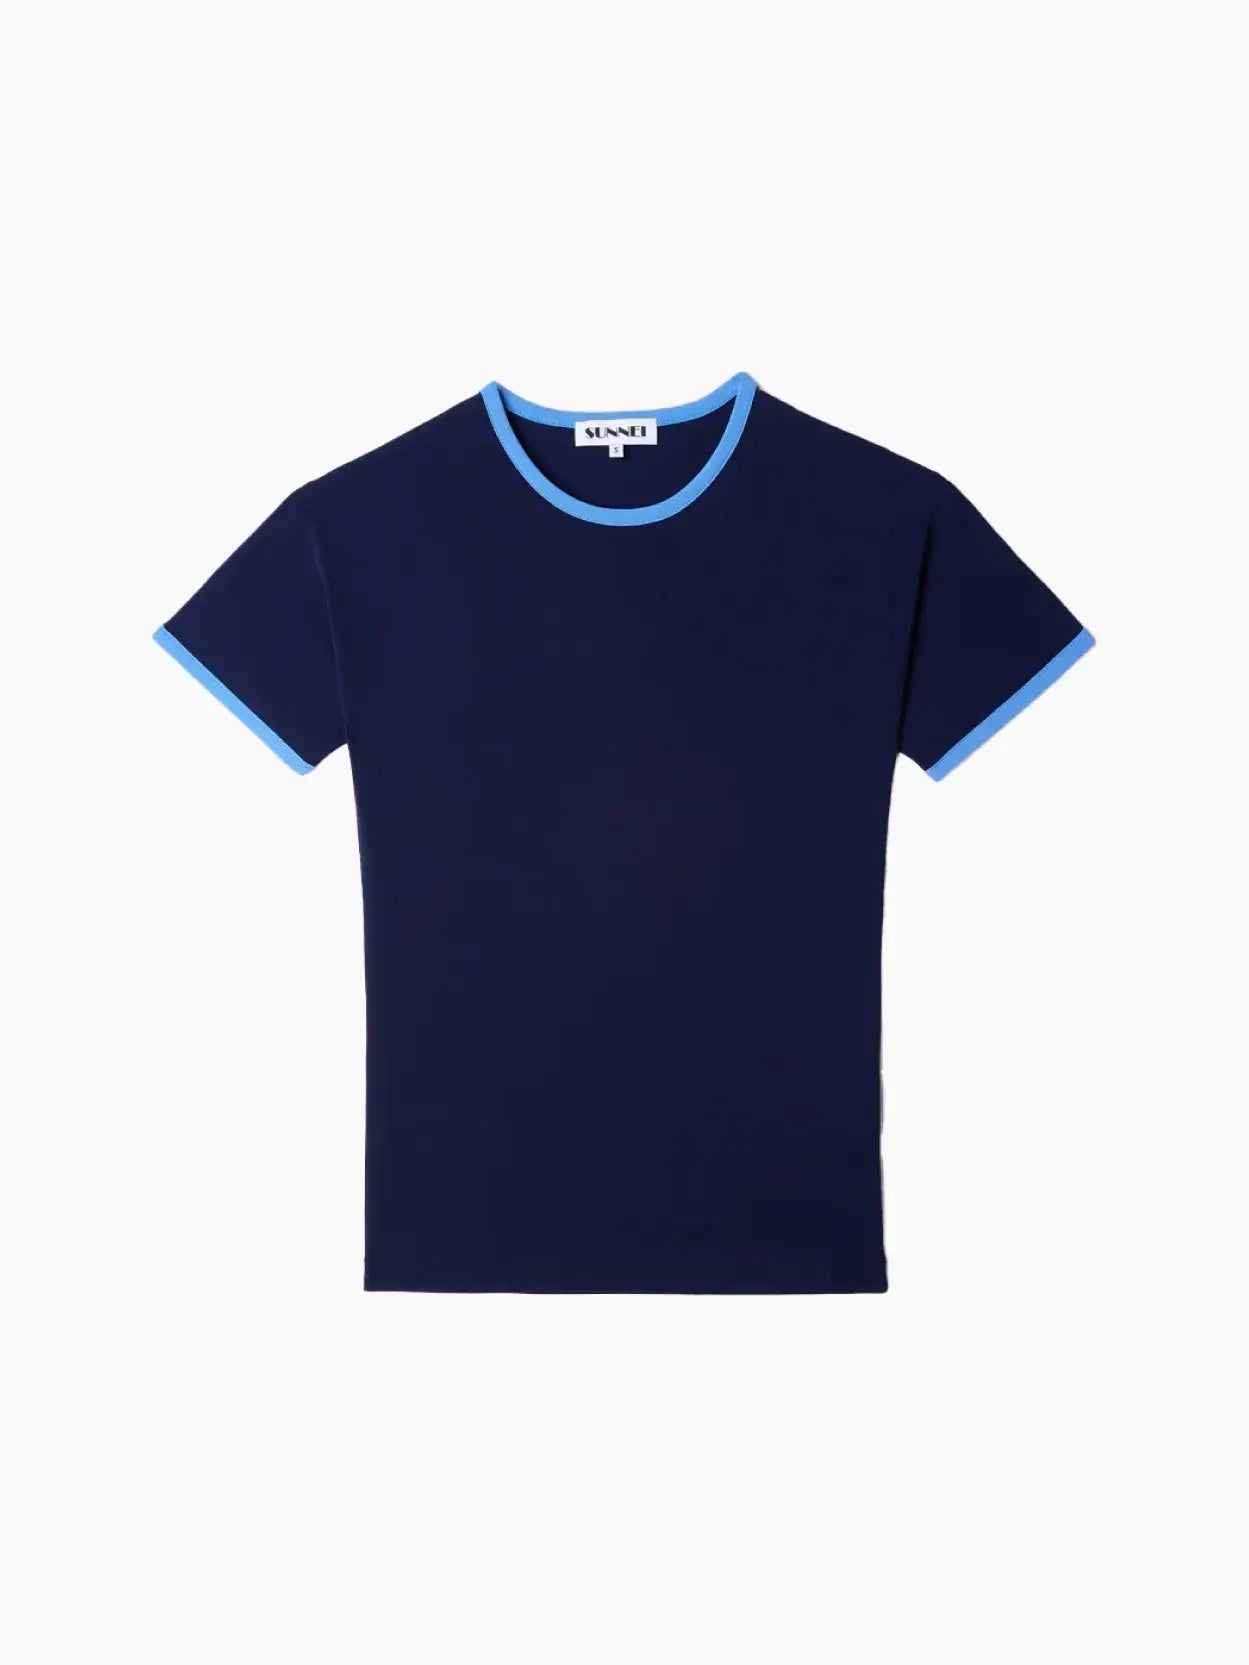 A plain, navy blue Stretchy Shortsleeve Top Navy with light blue trim around the collar and sleeves. The label inside the collar reads "Sunnei." The shirt, available at BassalStore, is displayed against a plain white background.